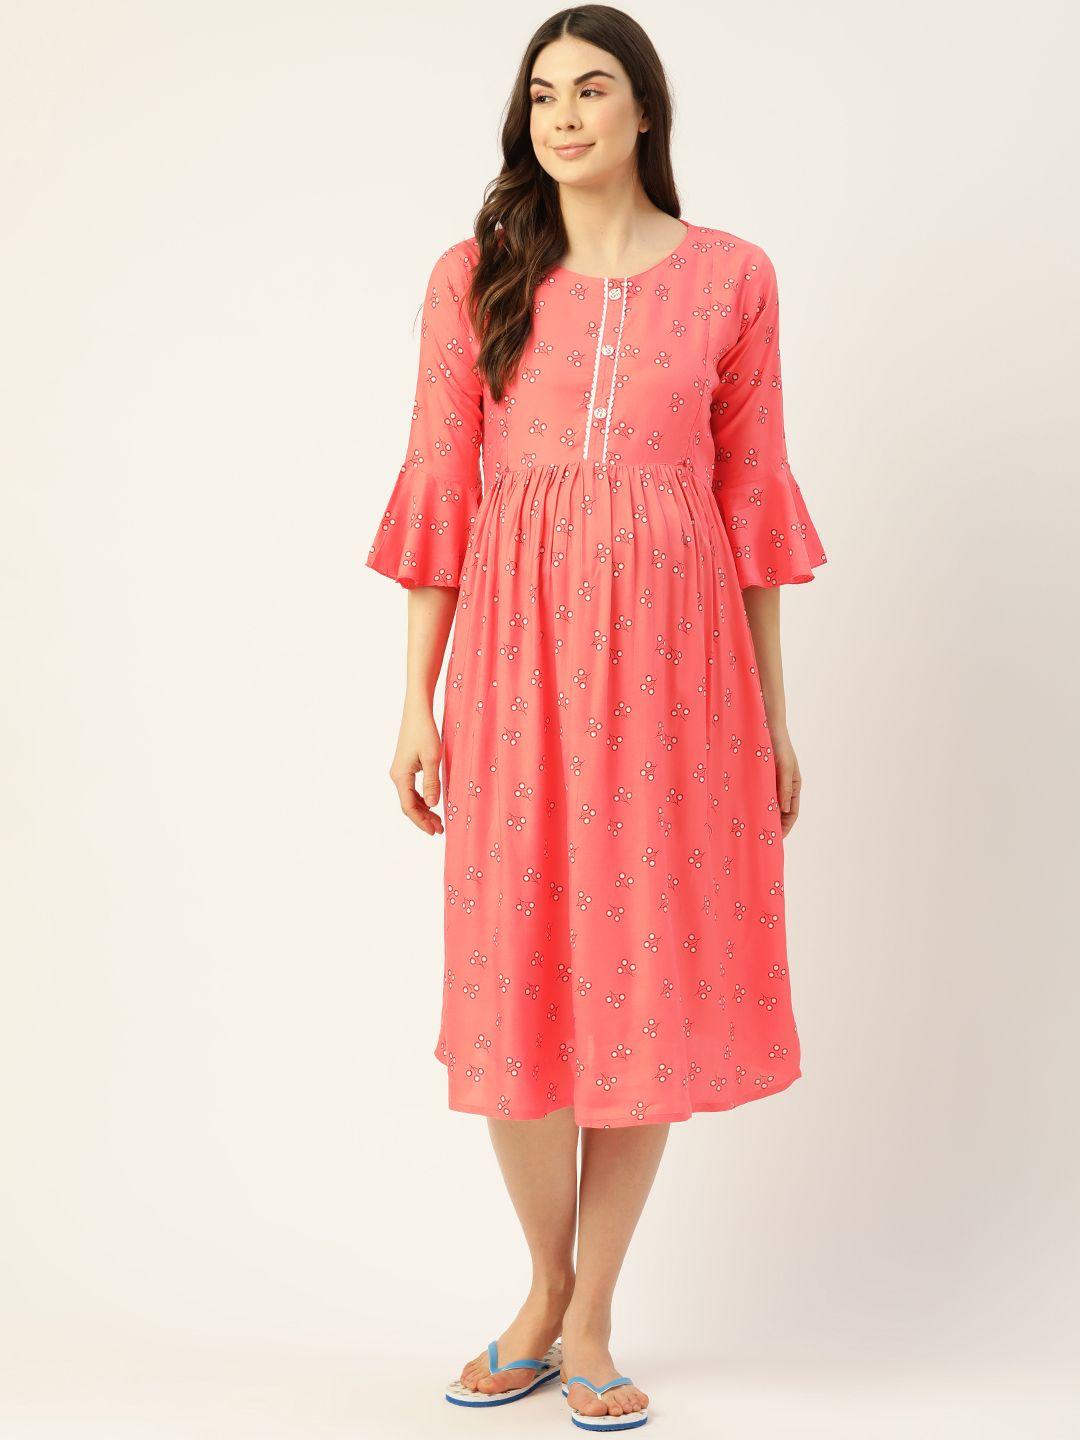 sweet-dreams-women-peach-coloured-floral-printed-maternity-nightdress